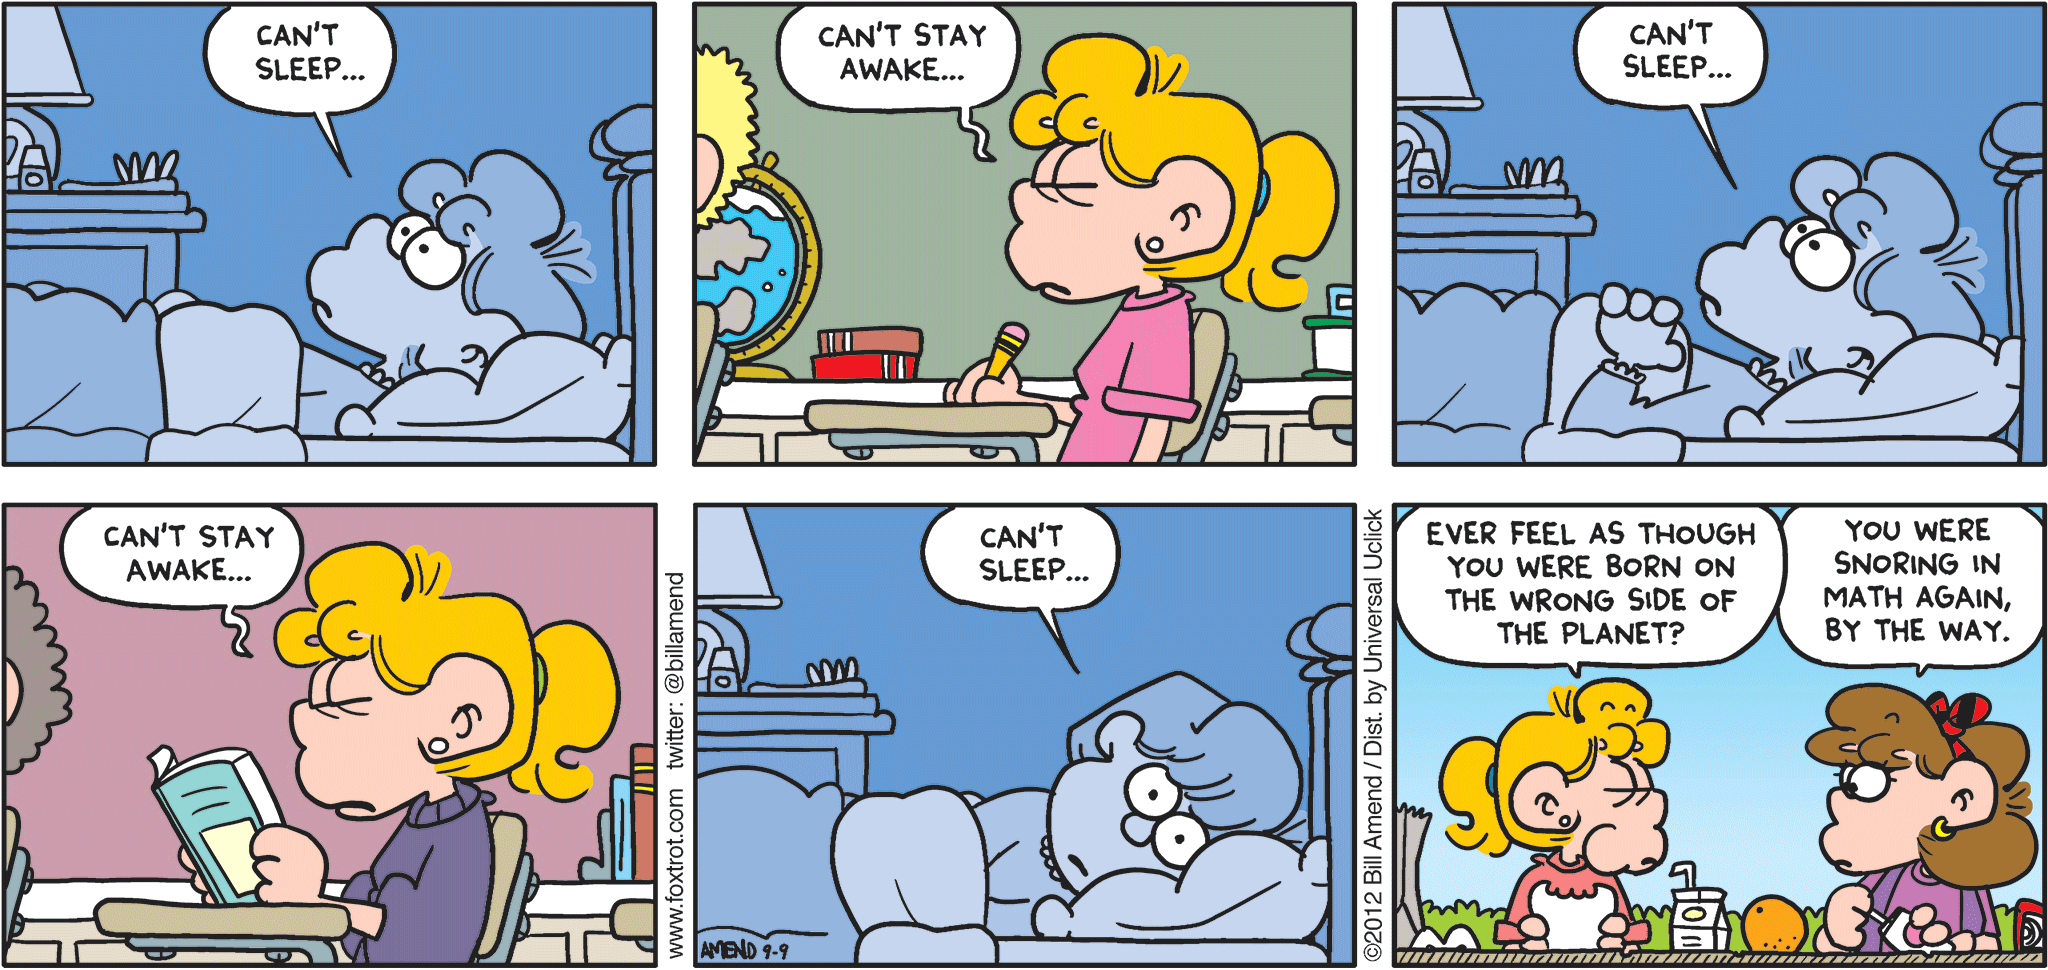 FoxTrot comic strip by Bill Amend - "Time Zonked" published September 9, 2012 - Paige: Can't sleep...can't stay awake...can't sleep...can't stay awake...can't sleep...Ever feel as though you were born on the wrong side of the planet? Nicole: You were snoring in math again, by the way.